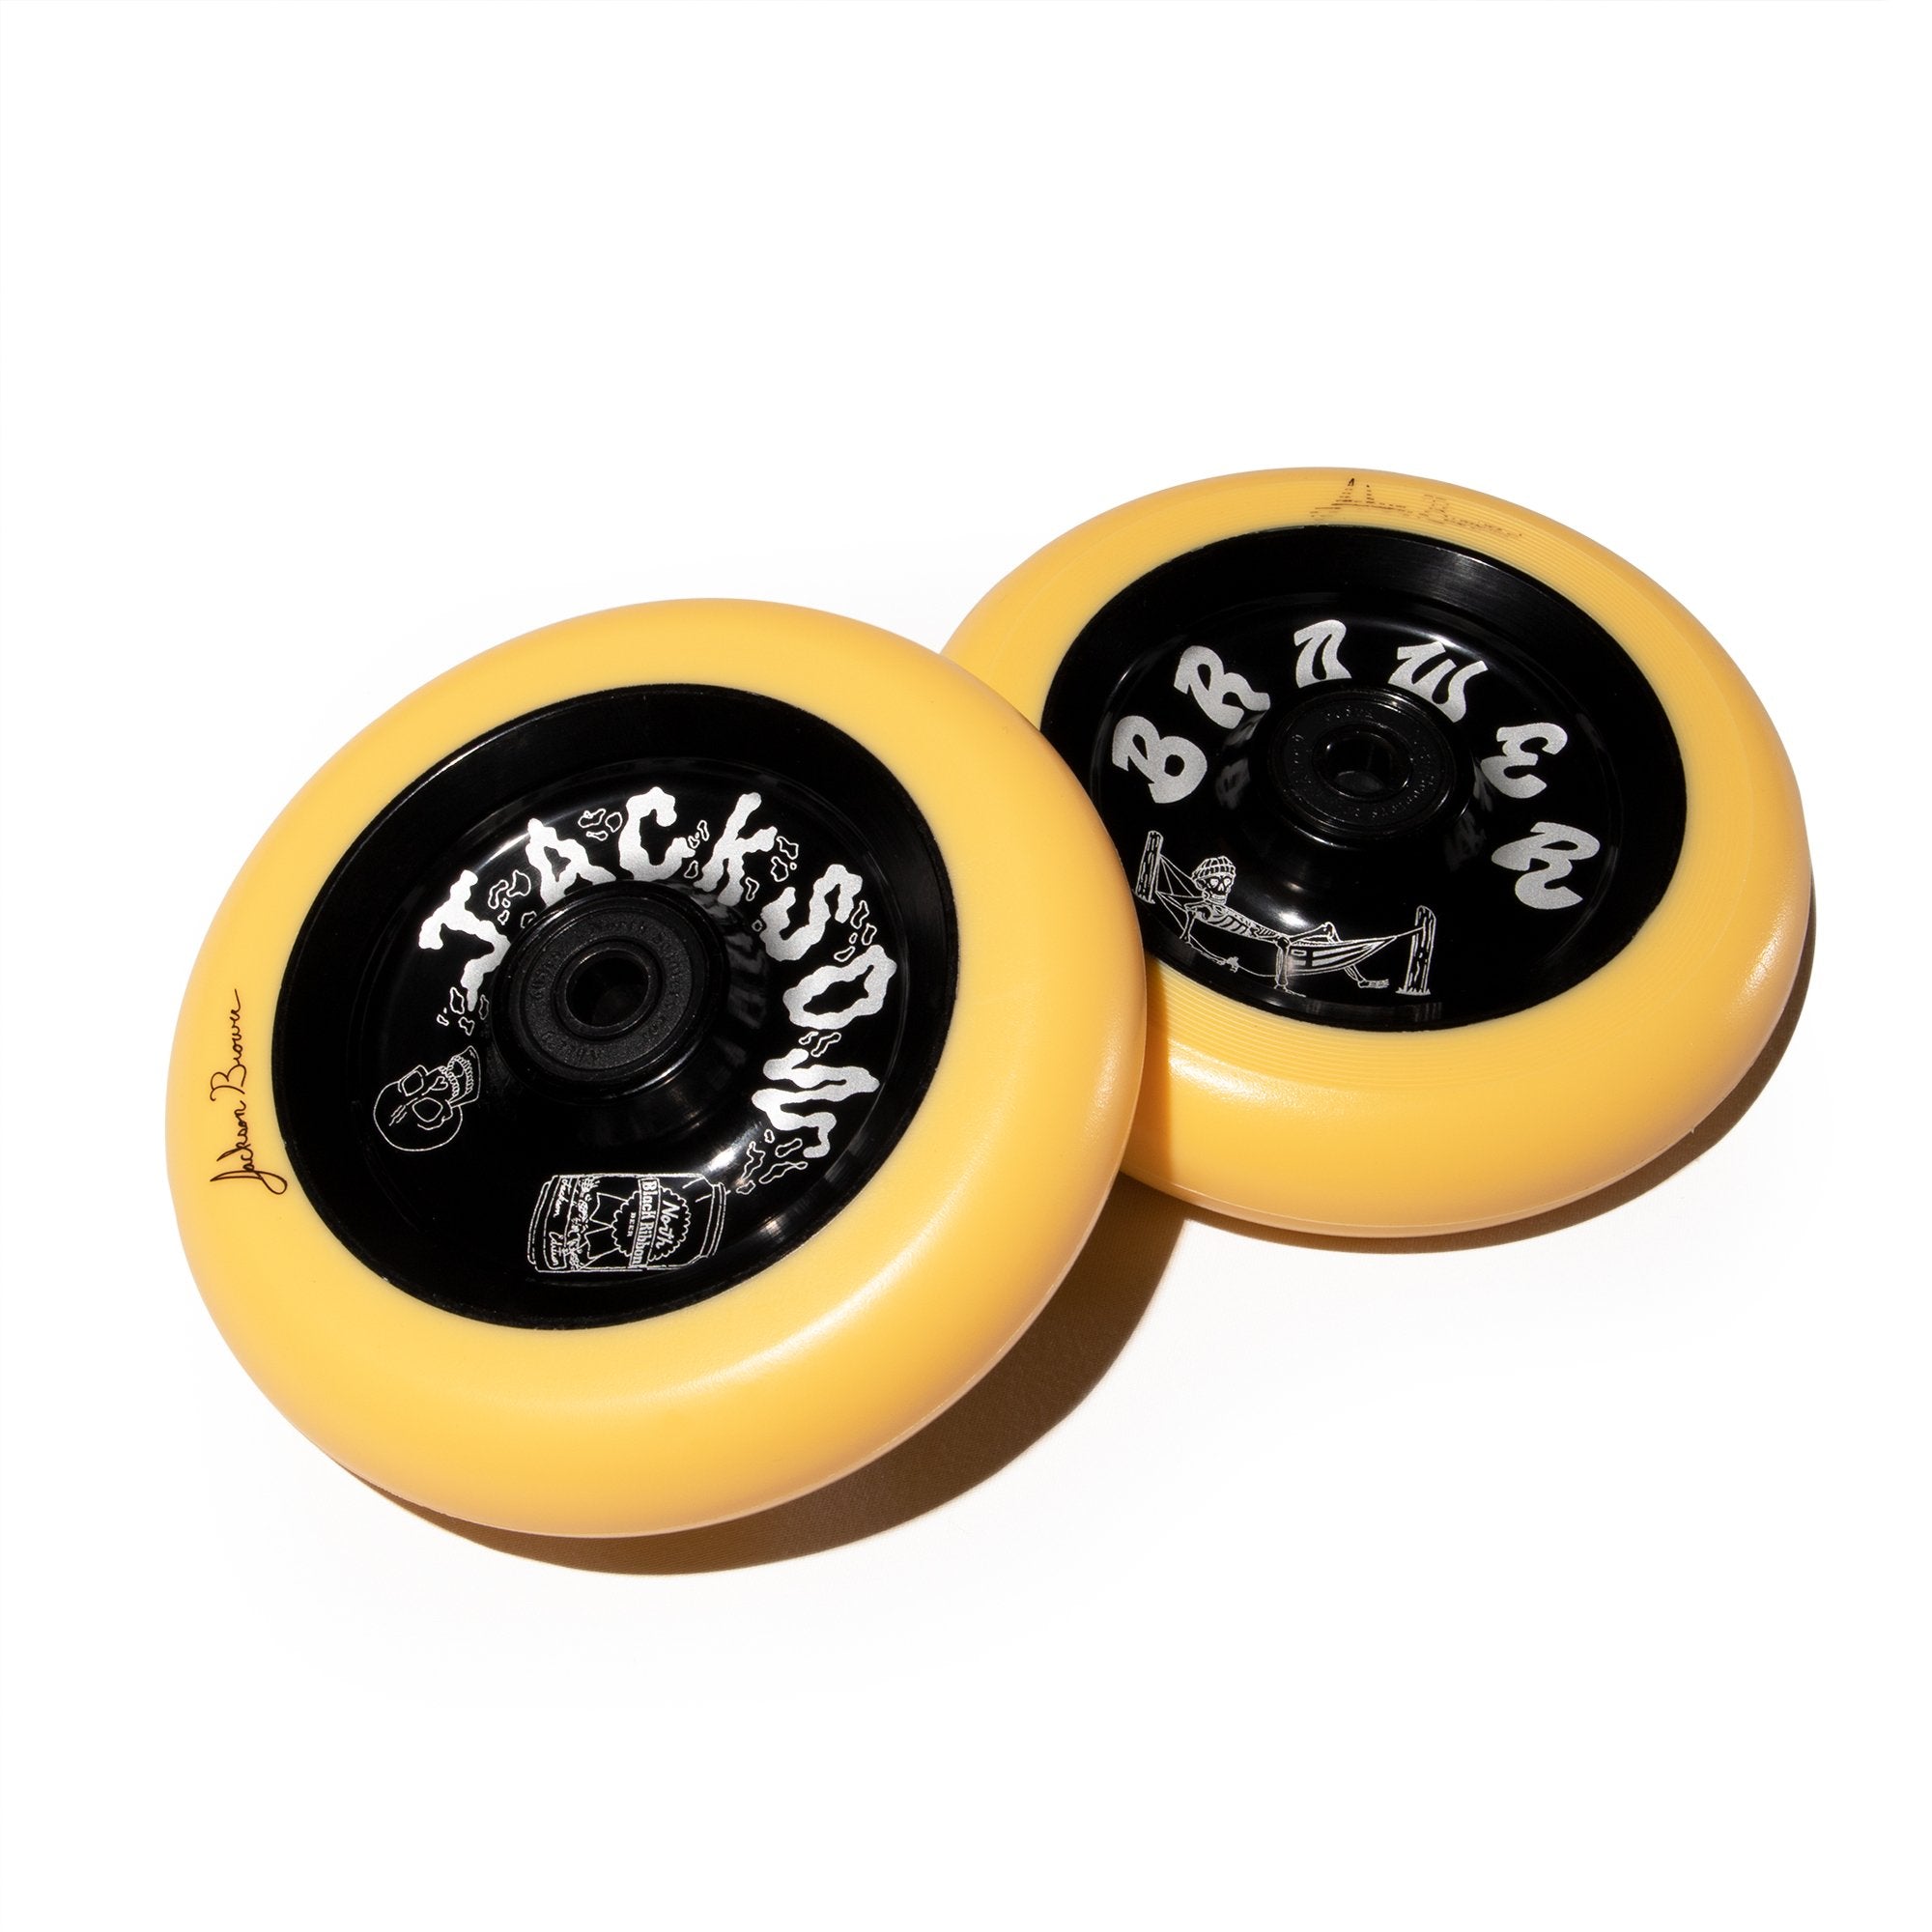 North Scooters Jackson Brower Signature 110X24mm (PAIR) - Scooter Wheels Set